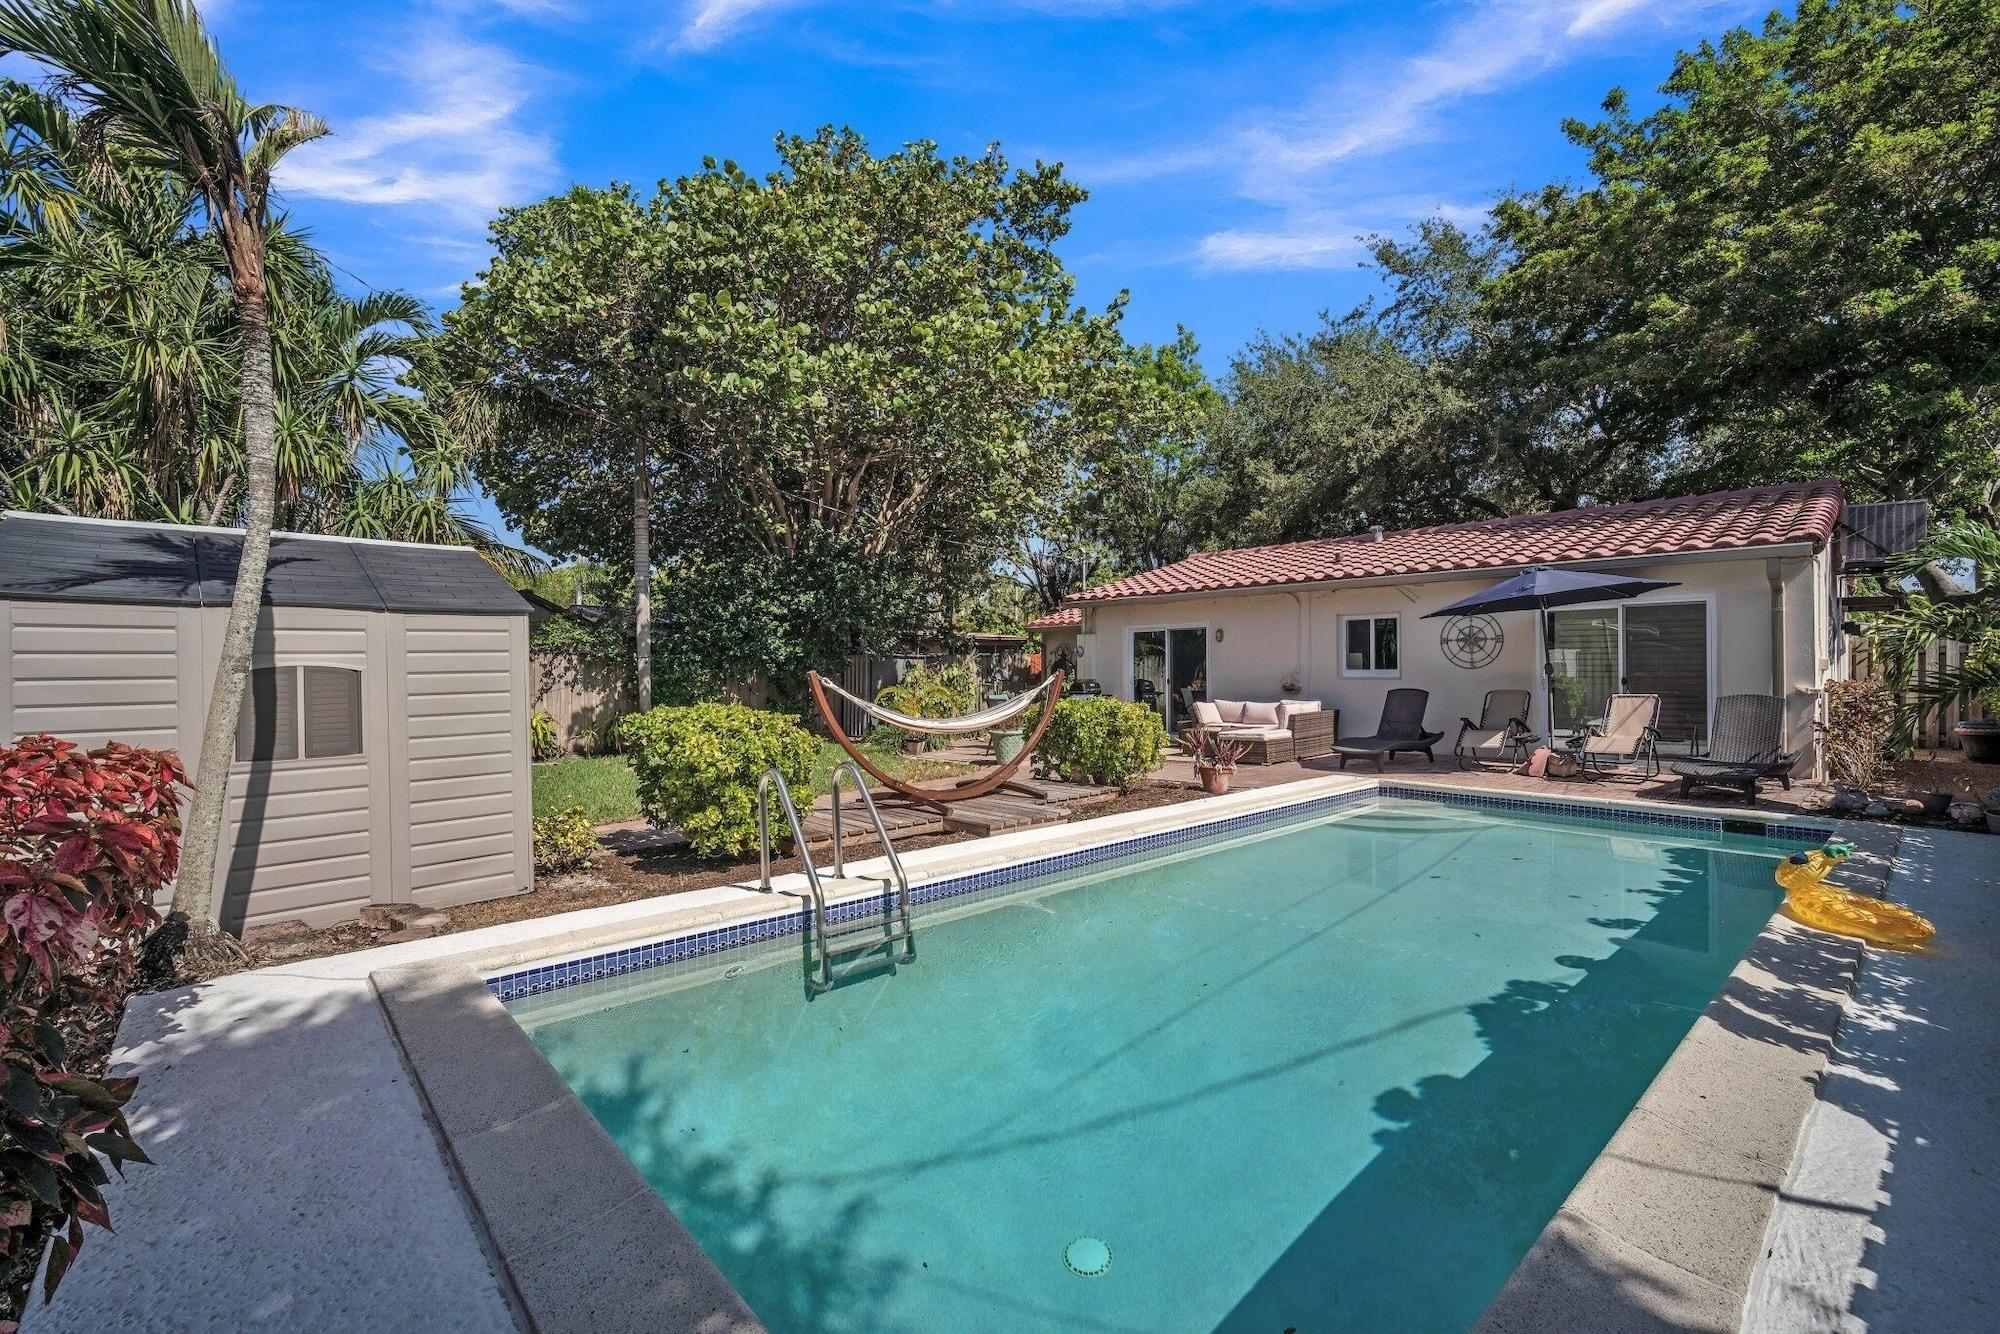 Miscellaneous Recently Renovated Paradise W/ Private Pool! Close To Everything! 3 Bedroom Home